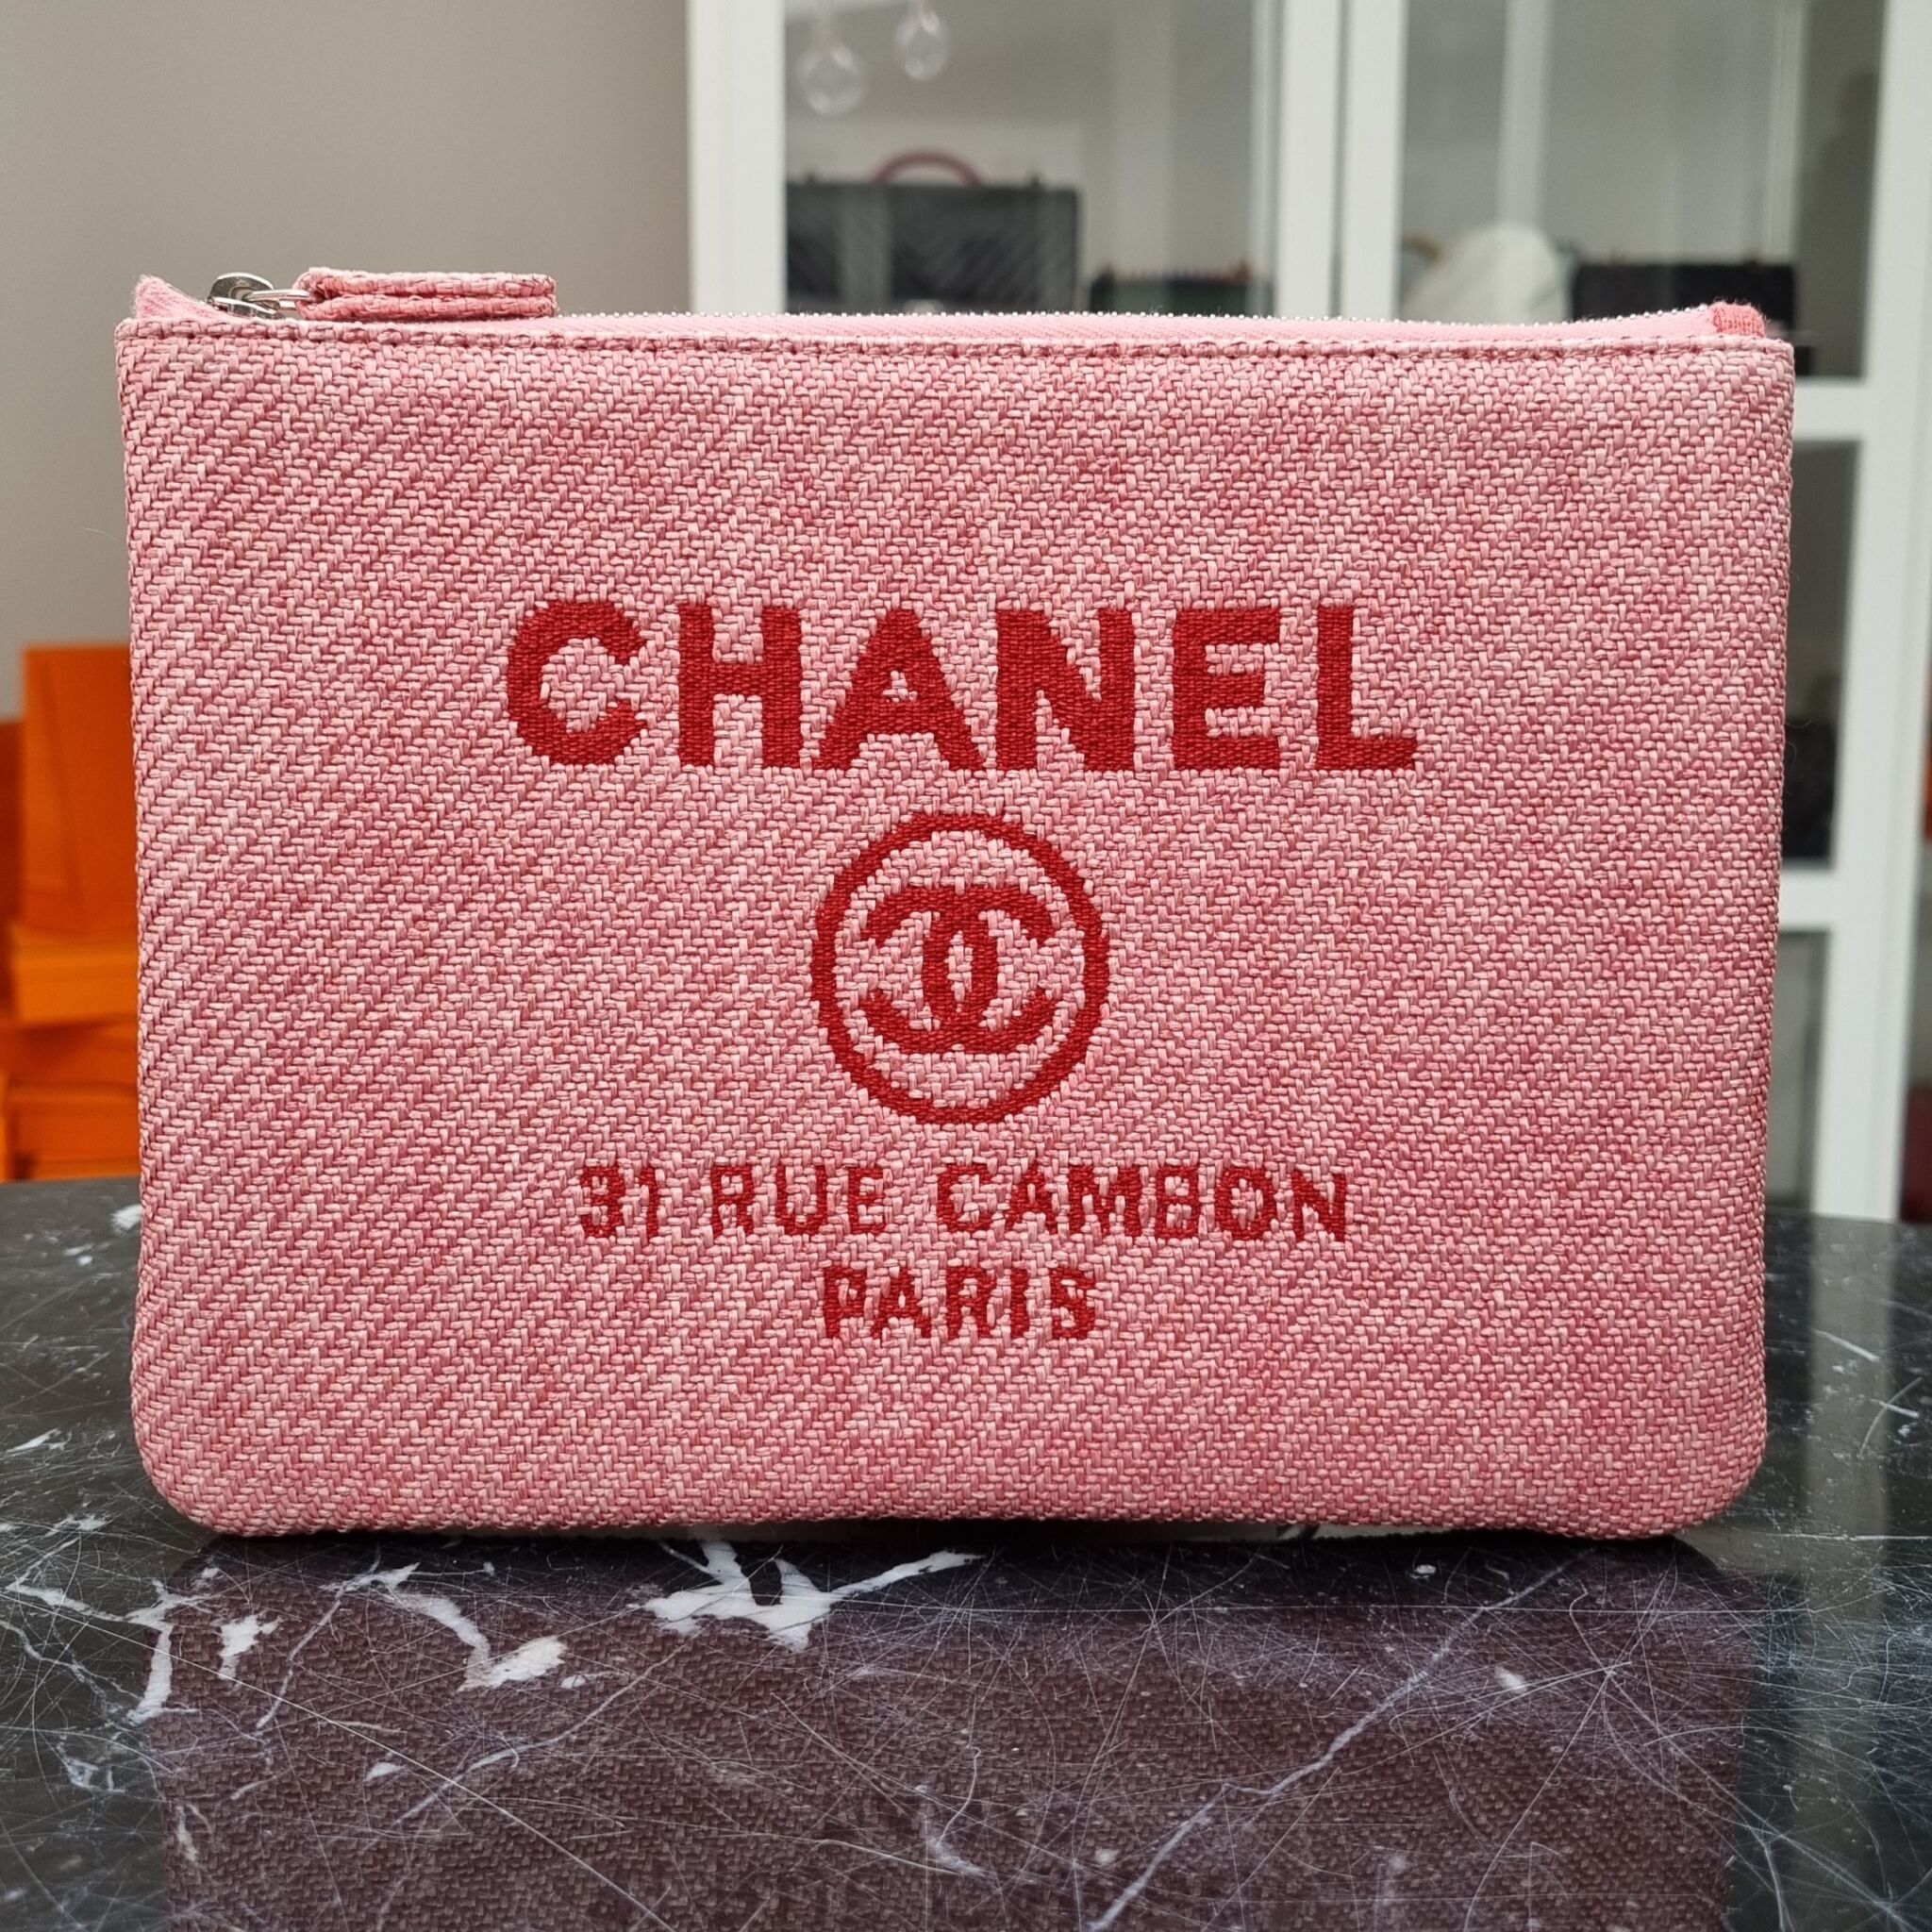 CHANEL, Bags, Chanel Pink Raffia Large Deauville Pouch